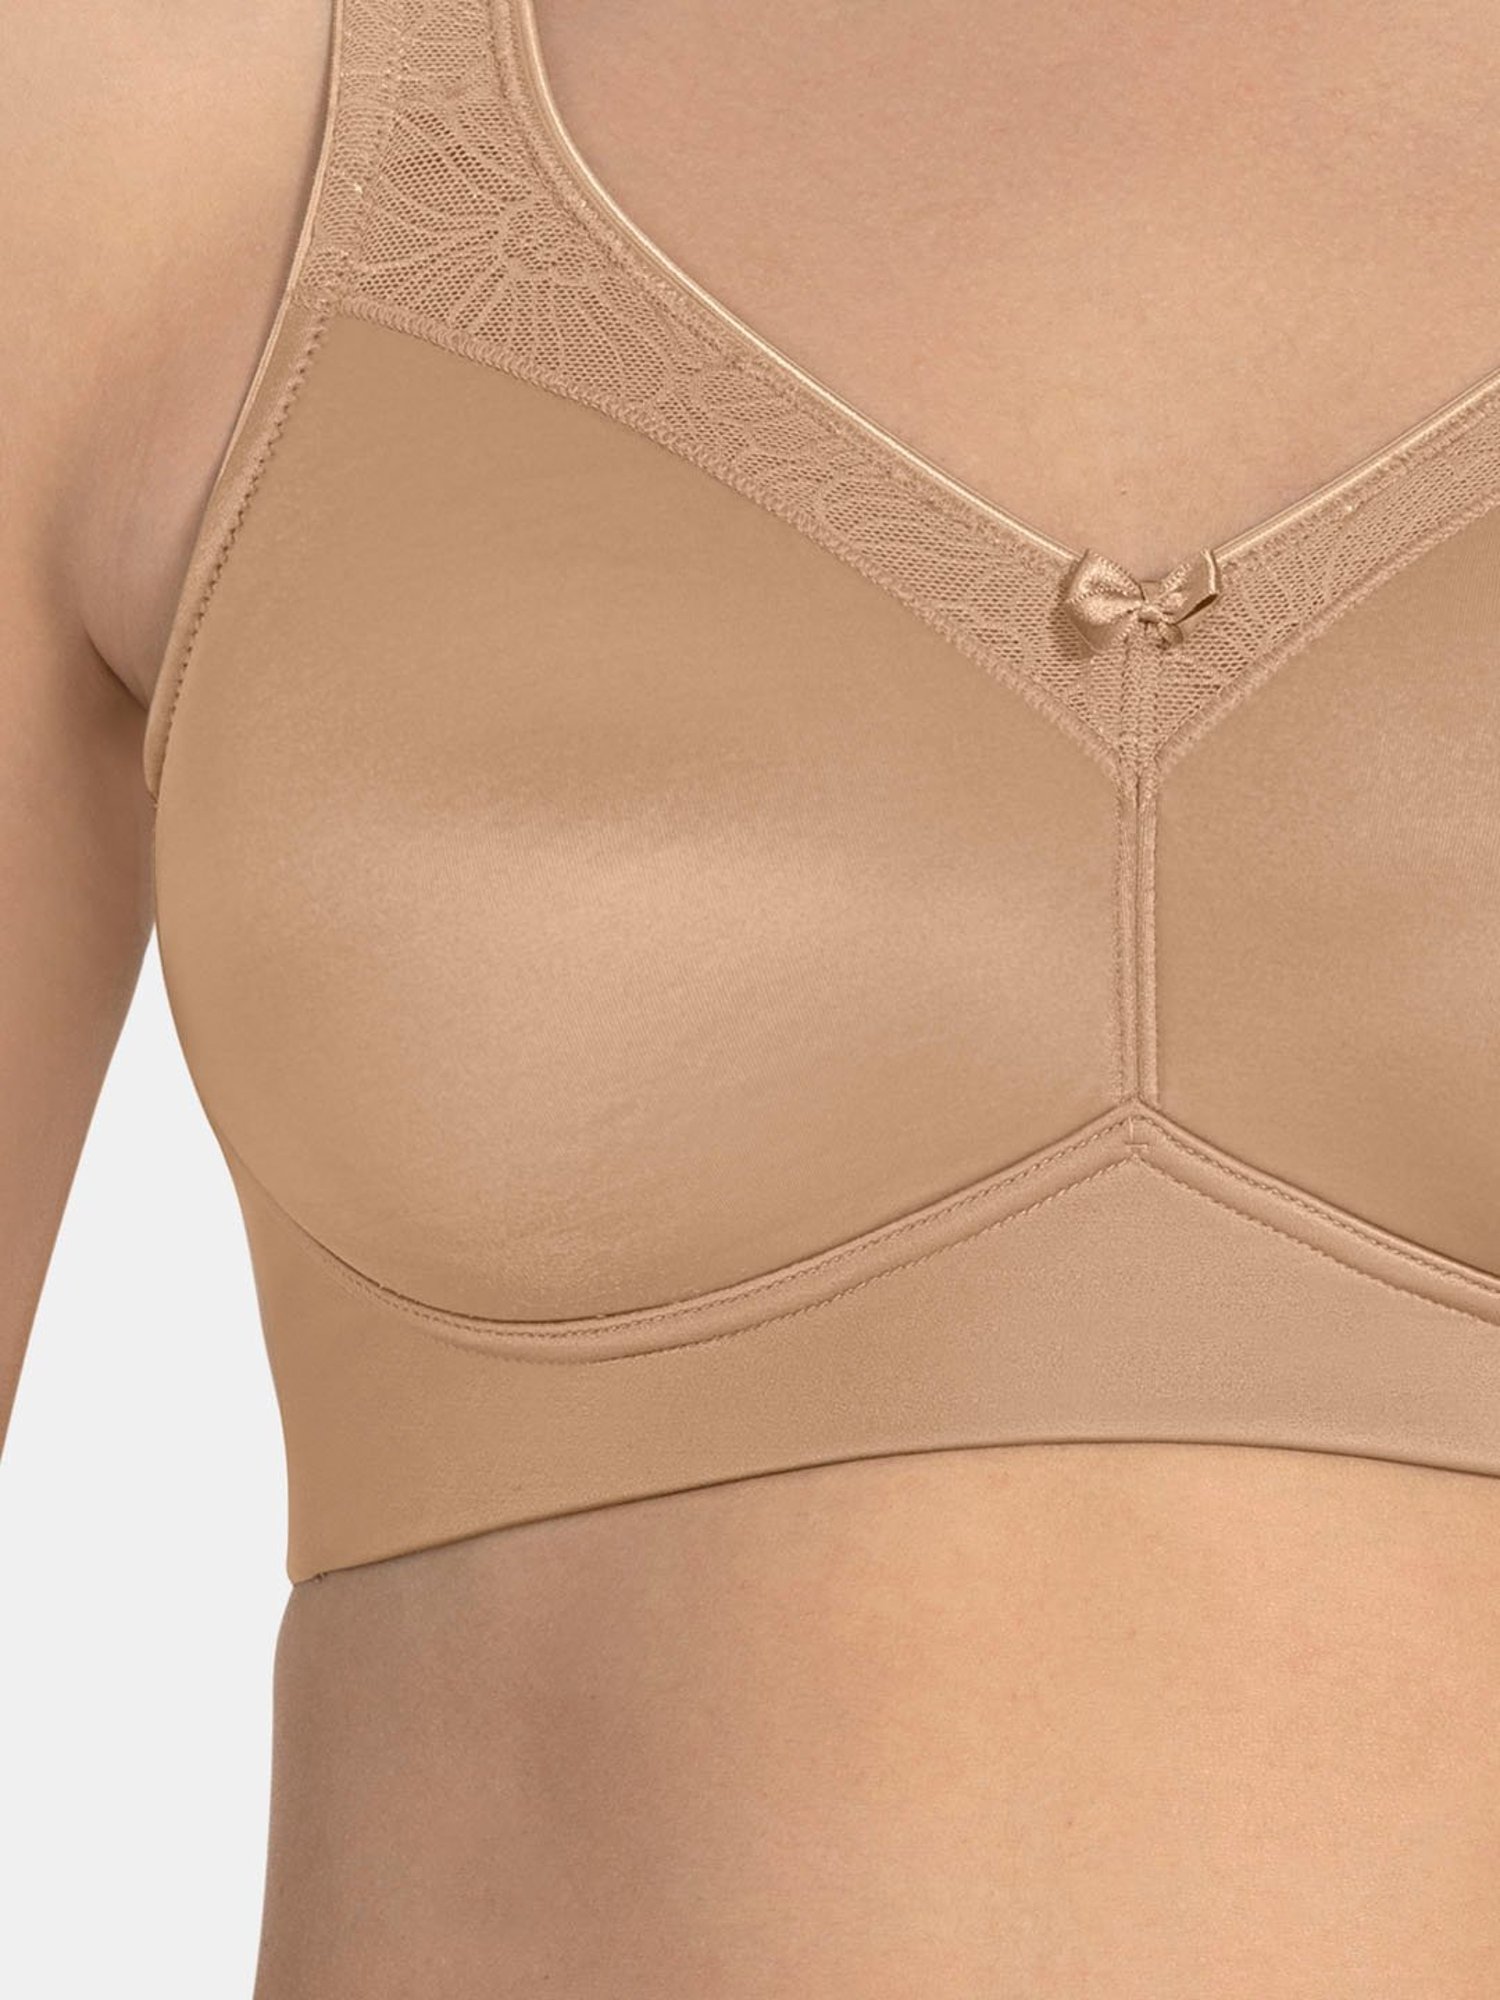 Amante Sandalwood Non Wired Non Padded Full Coverage Bra